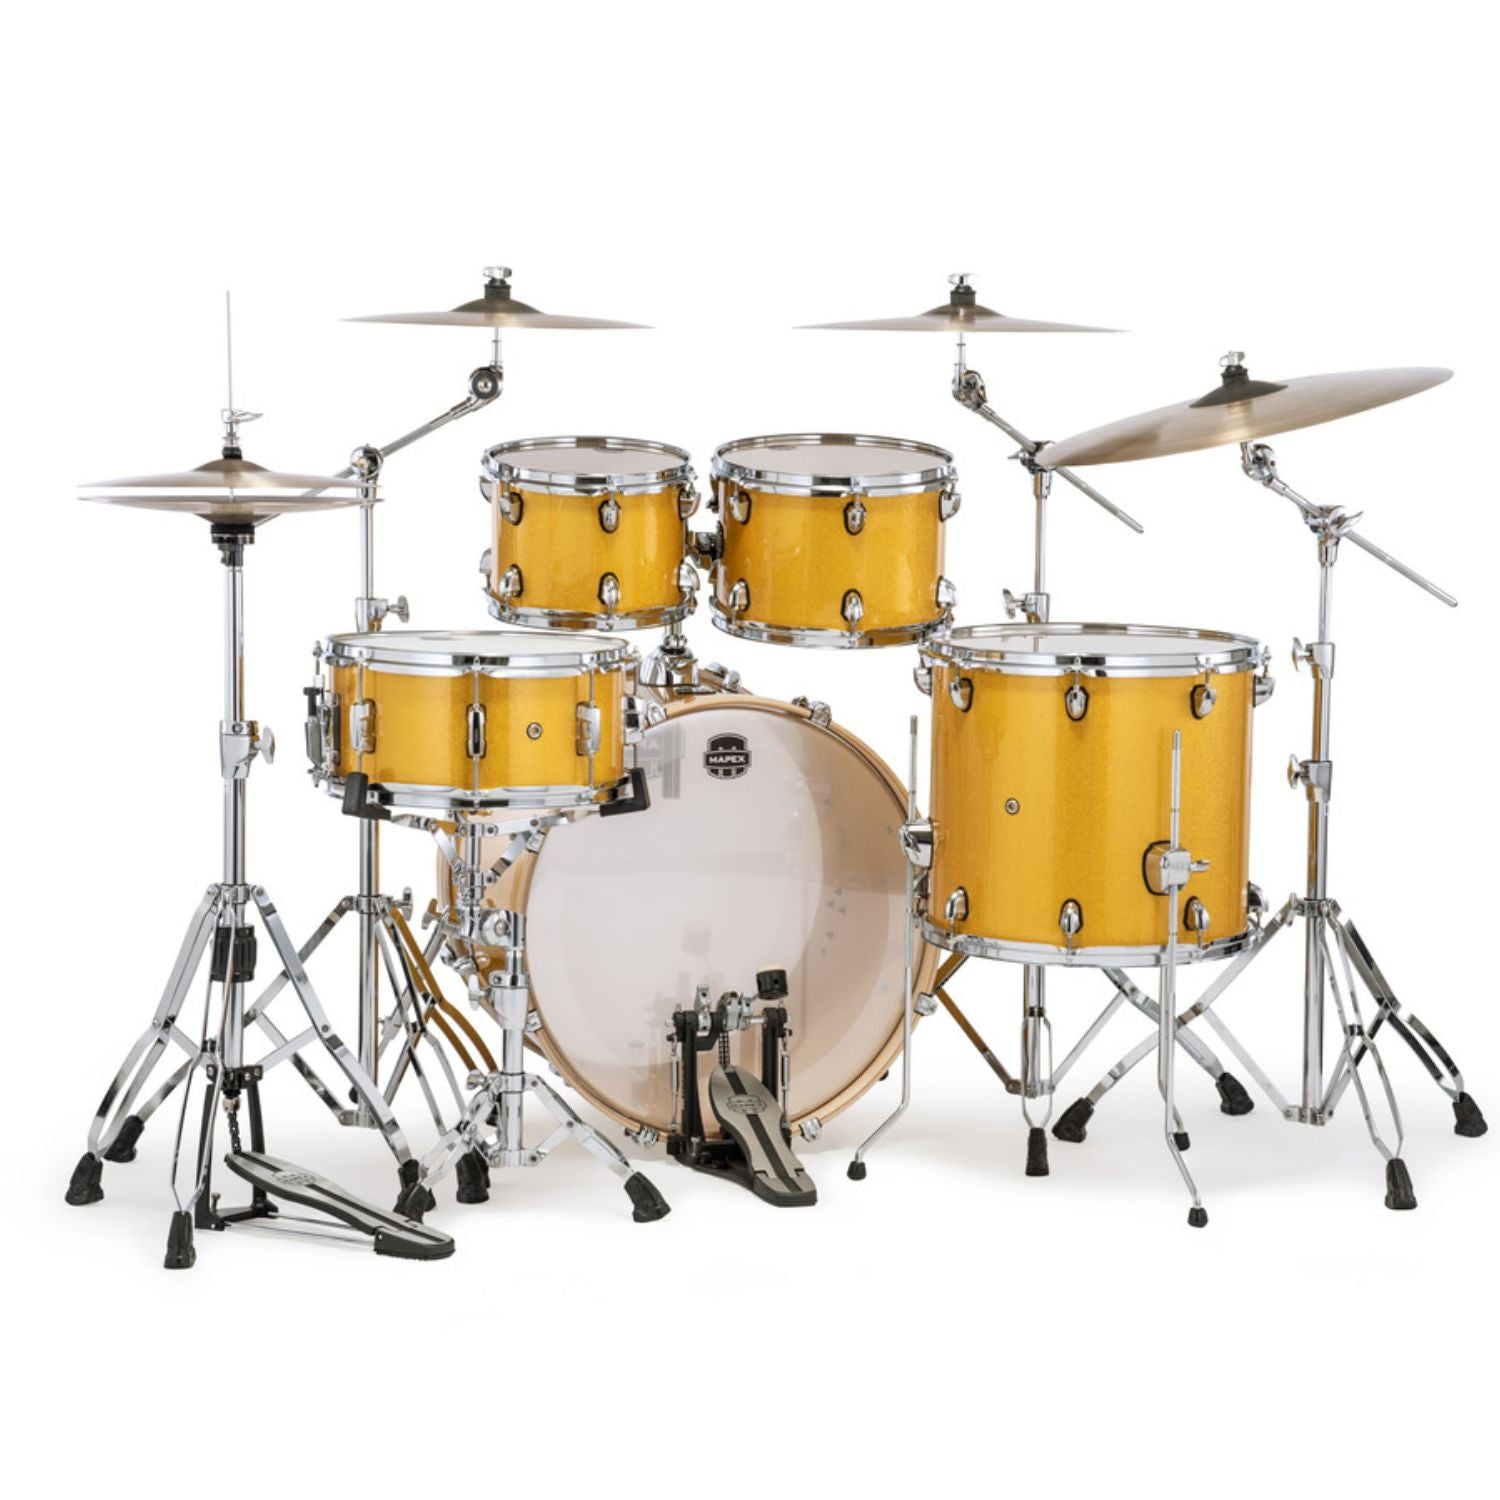 Trống Cơ Mapex Mars Birch MA529SF (22/10 - 12/16/14) + Hardware L4HPACK 400 Series + Cymbal PAISTE PST3 - Việt Music